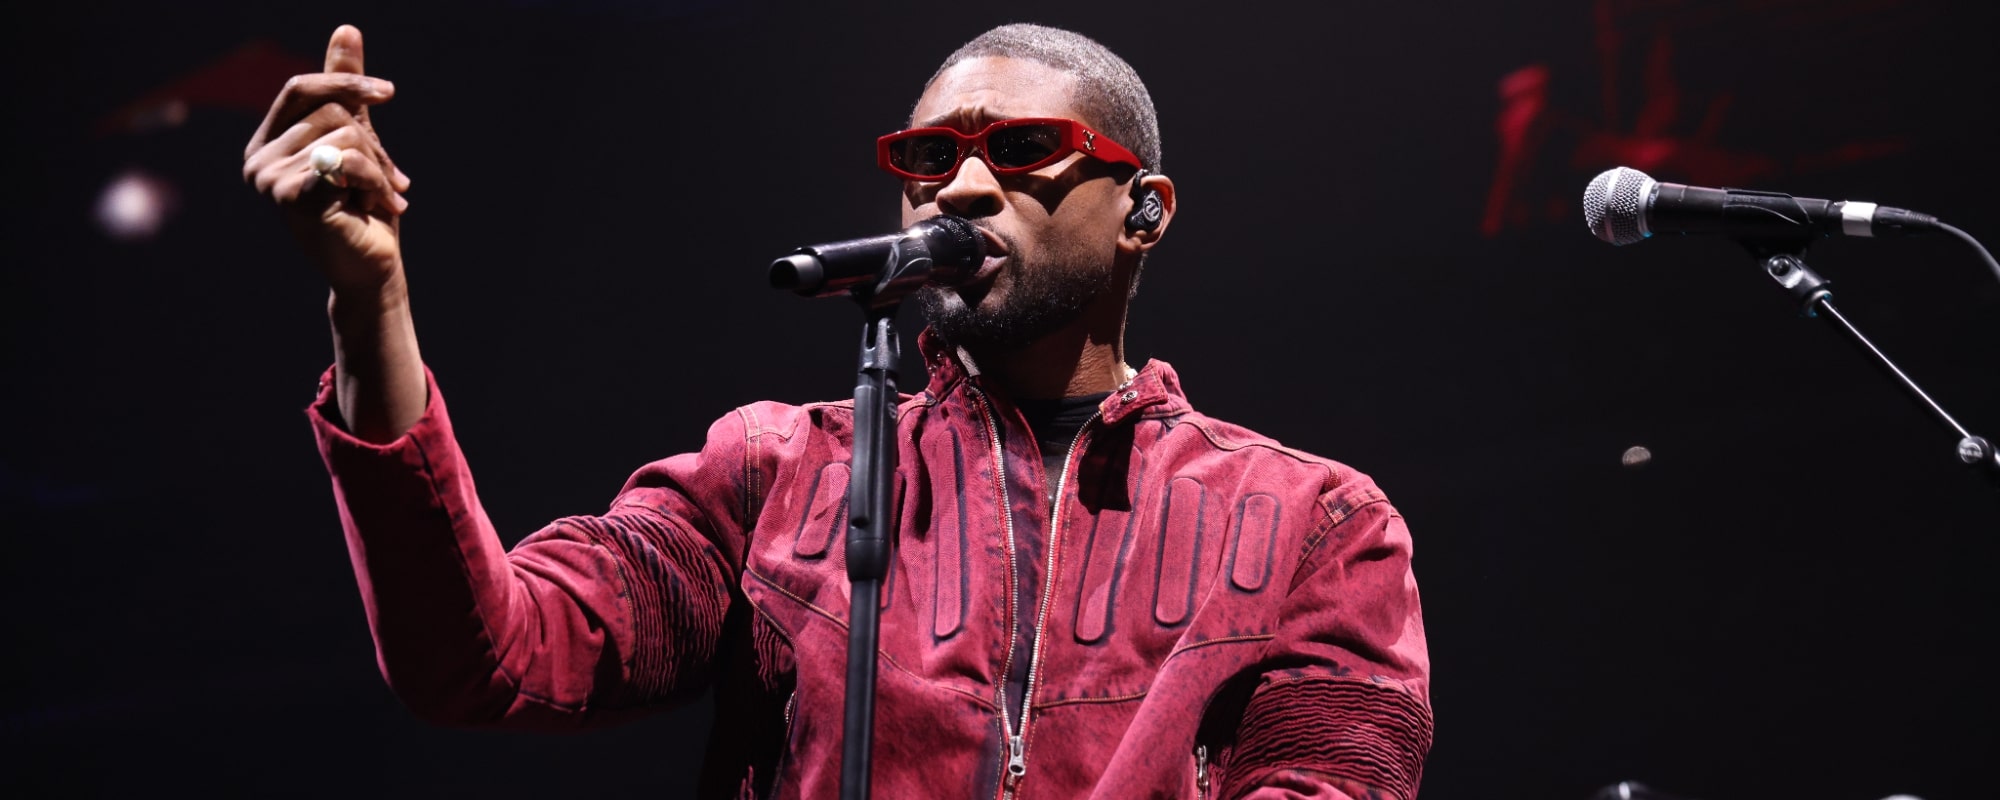 Usher will perform at the Super Bowl